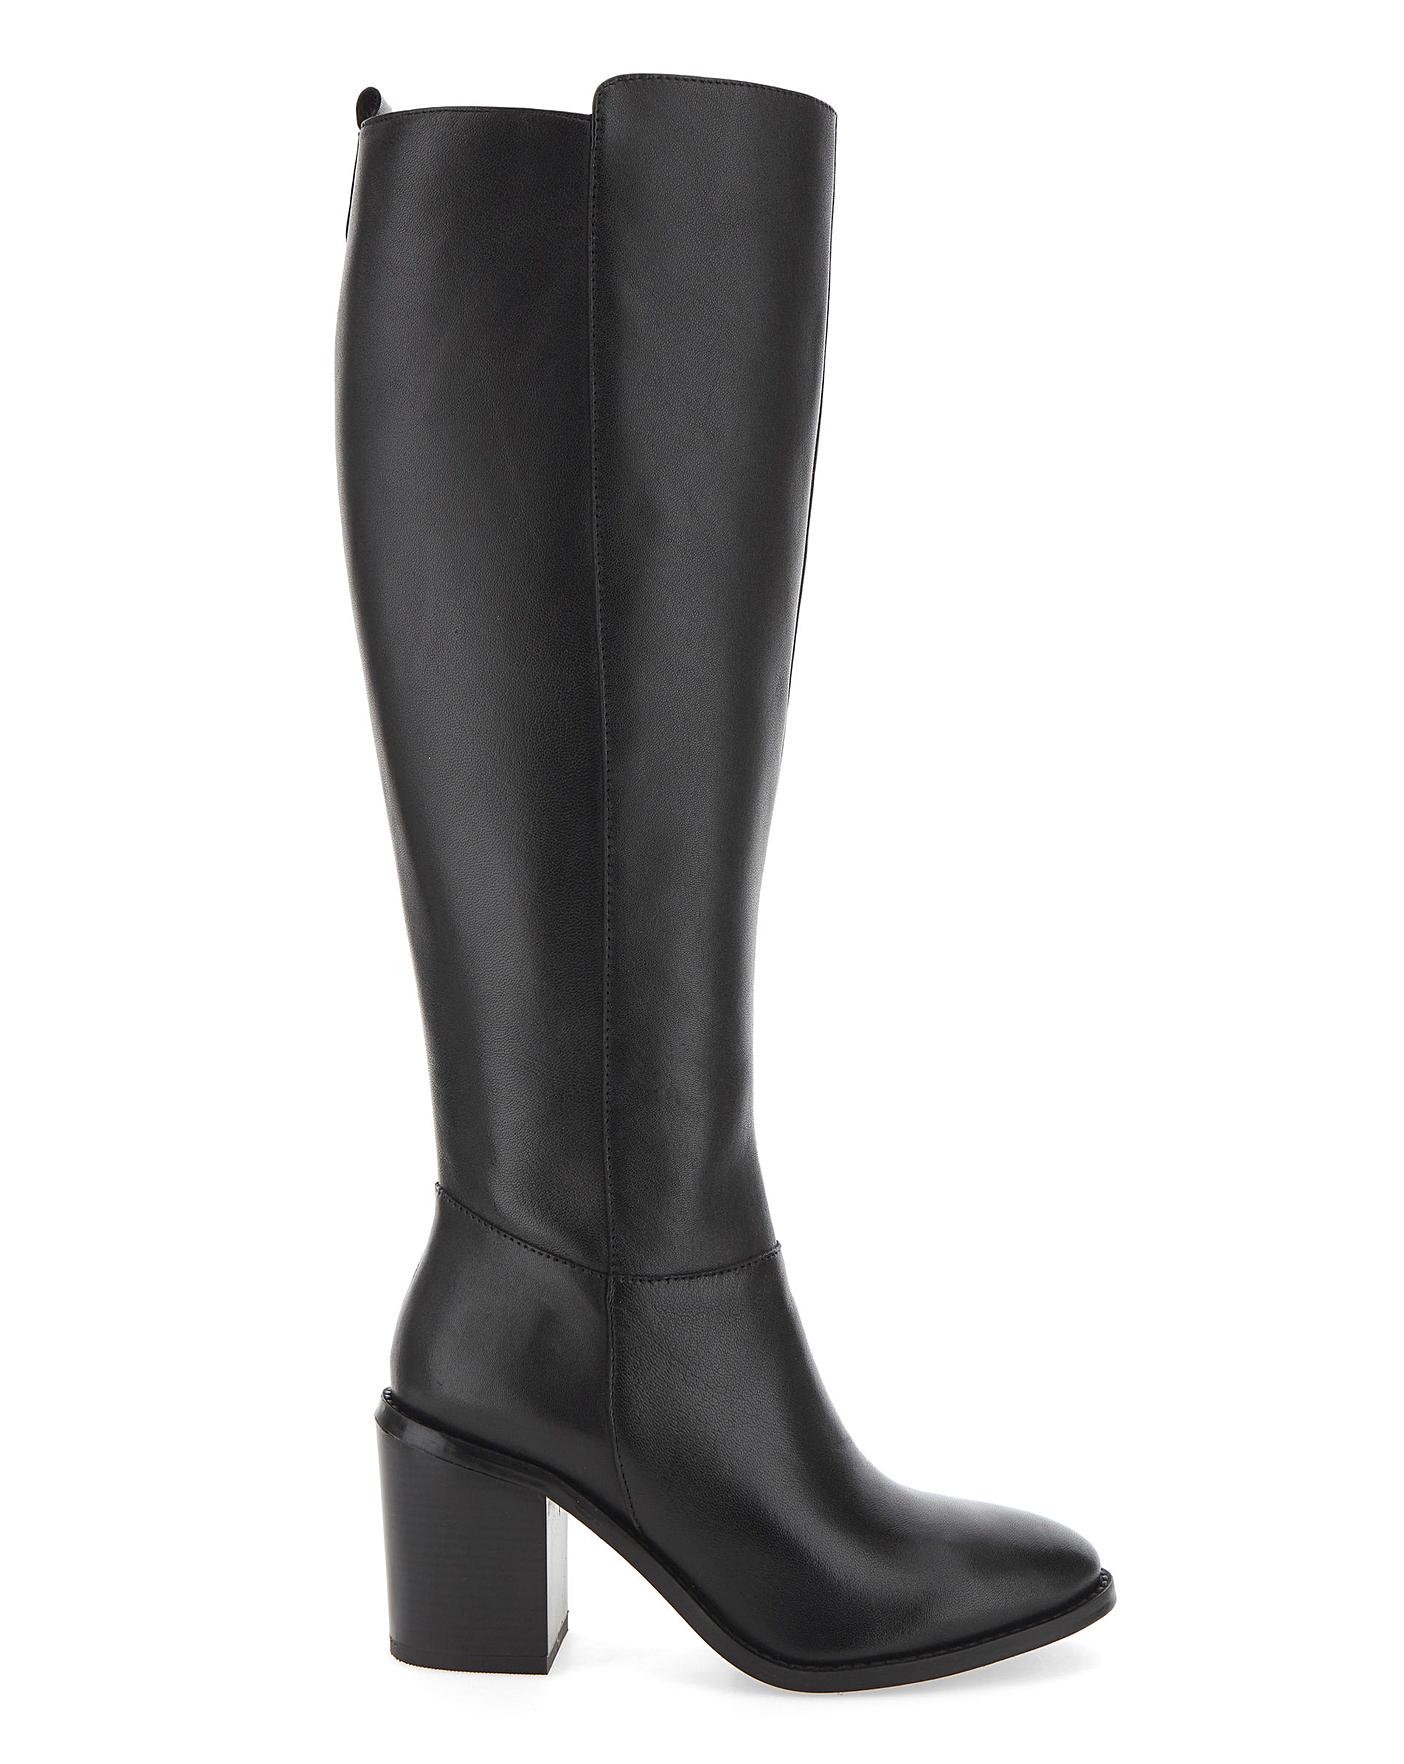 wide calf fit knee high boots